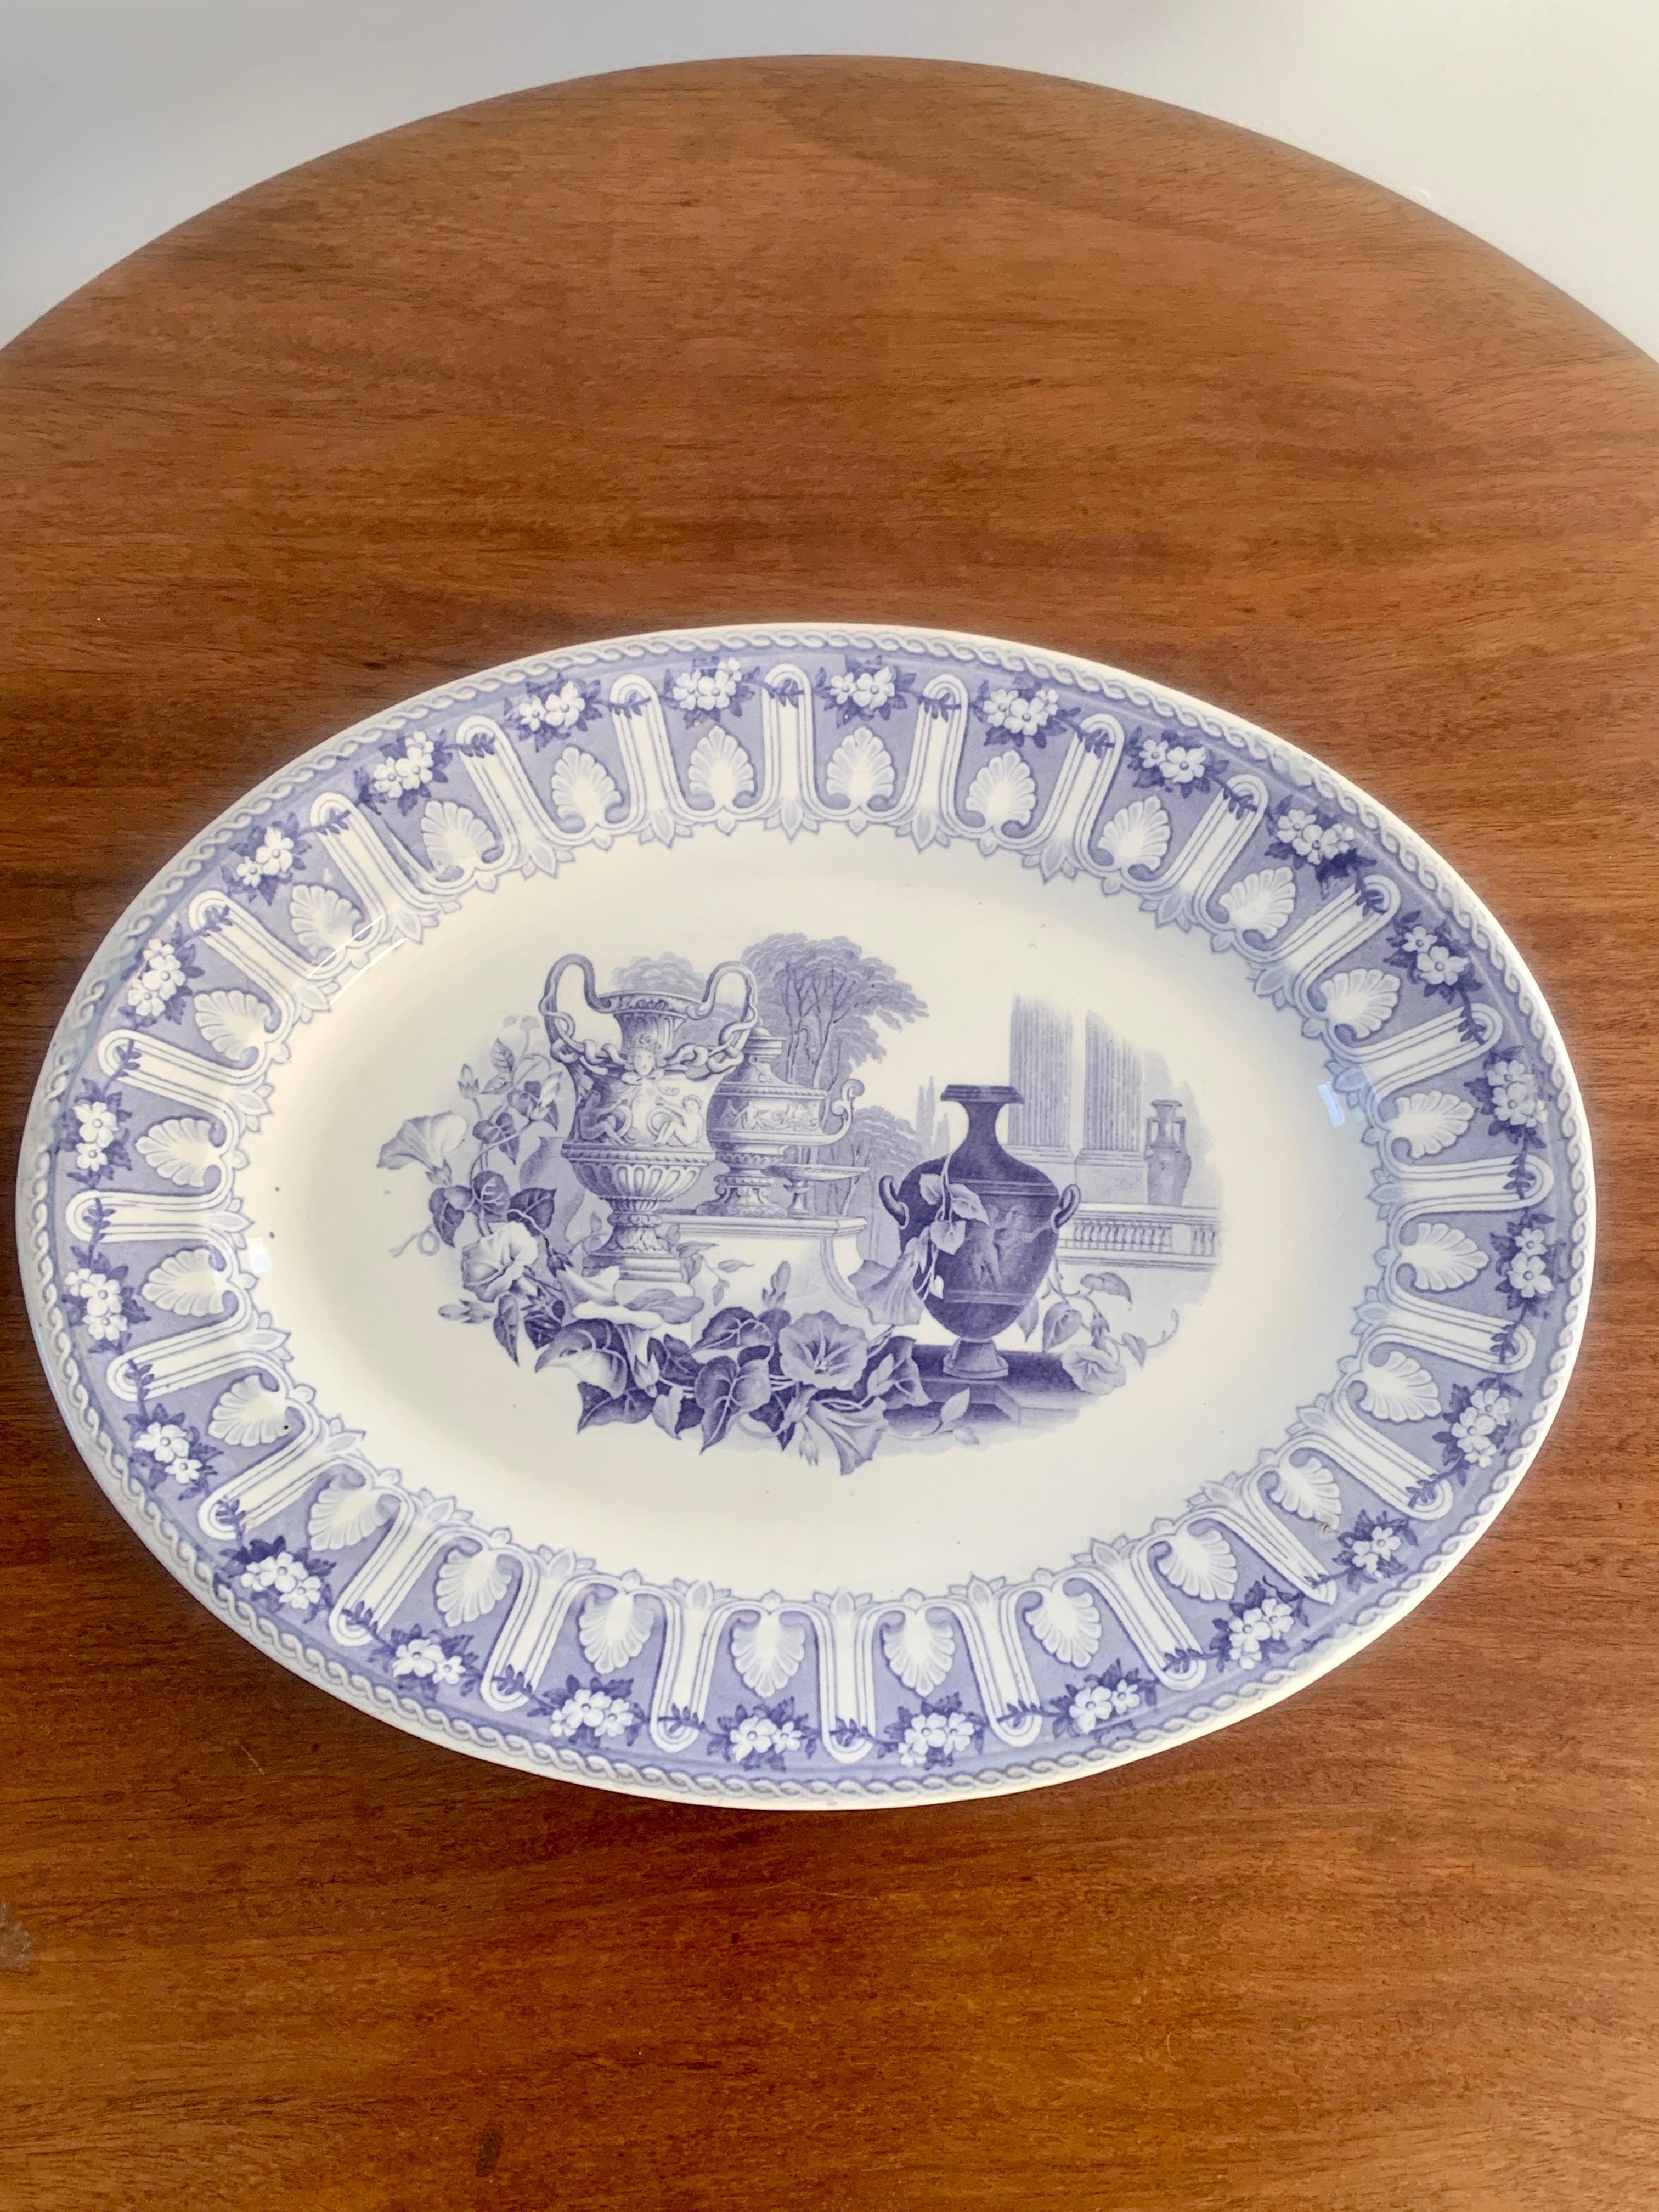 19th Century Blue and White Ironstone Transferware Platter For Sale 2